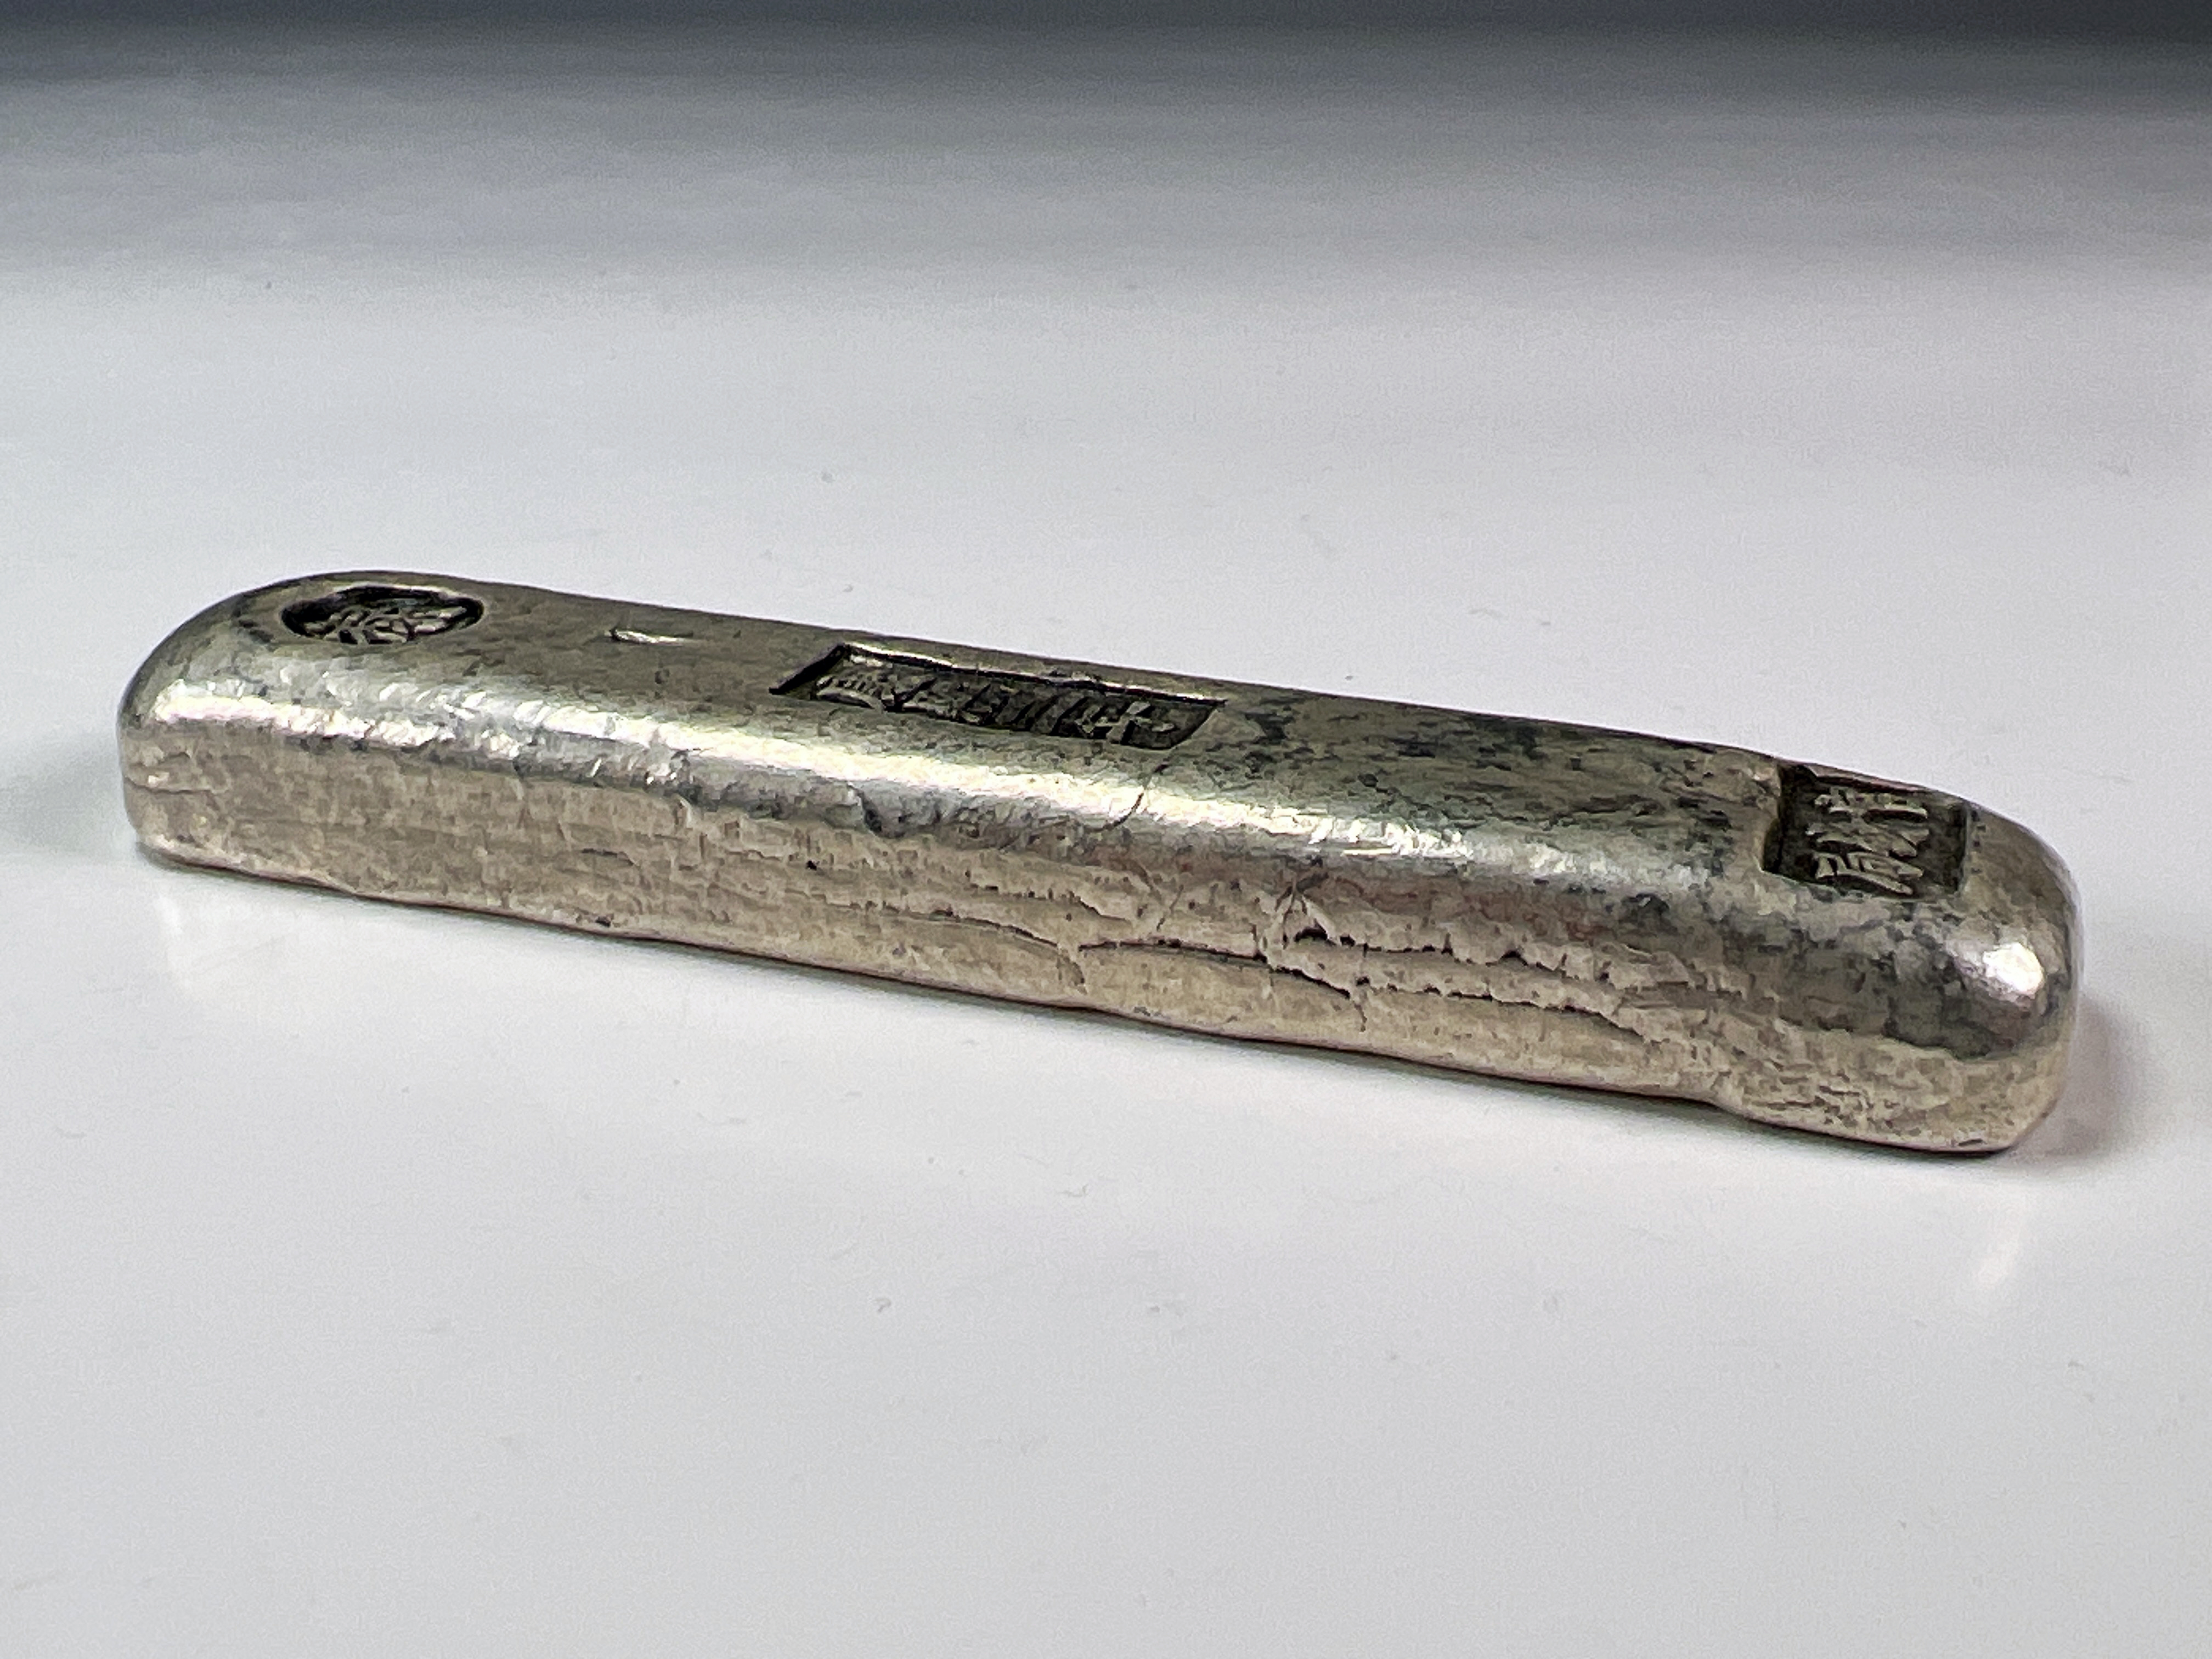 Exquisite Chinese Silver Character Ingot - A Touch Of History image 2